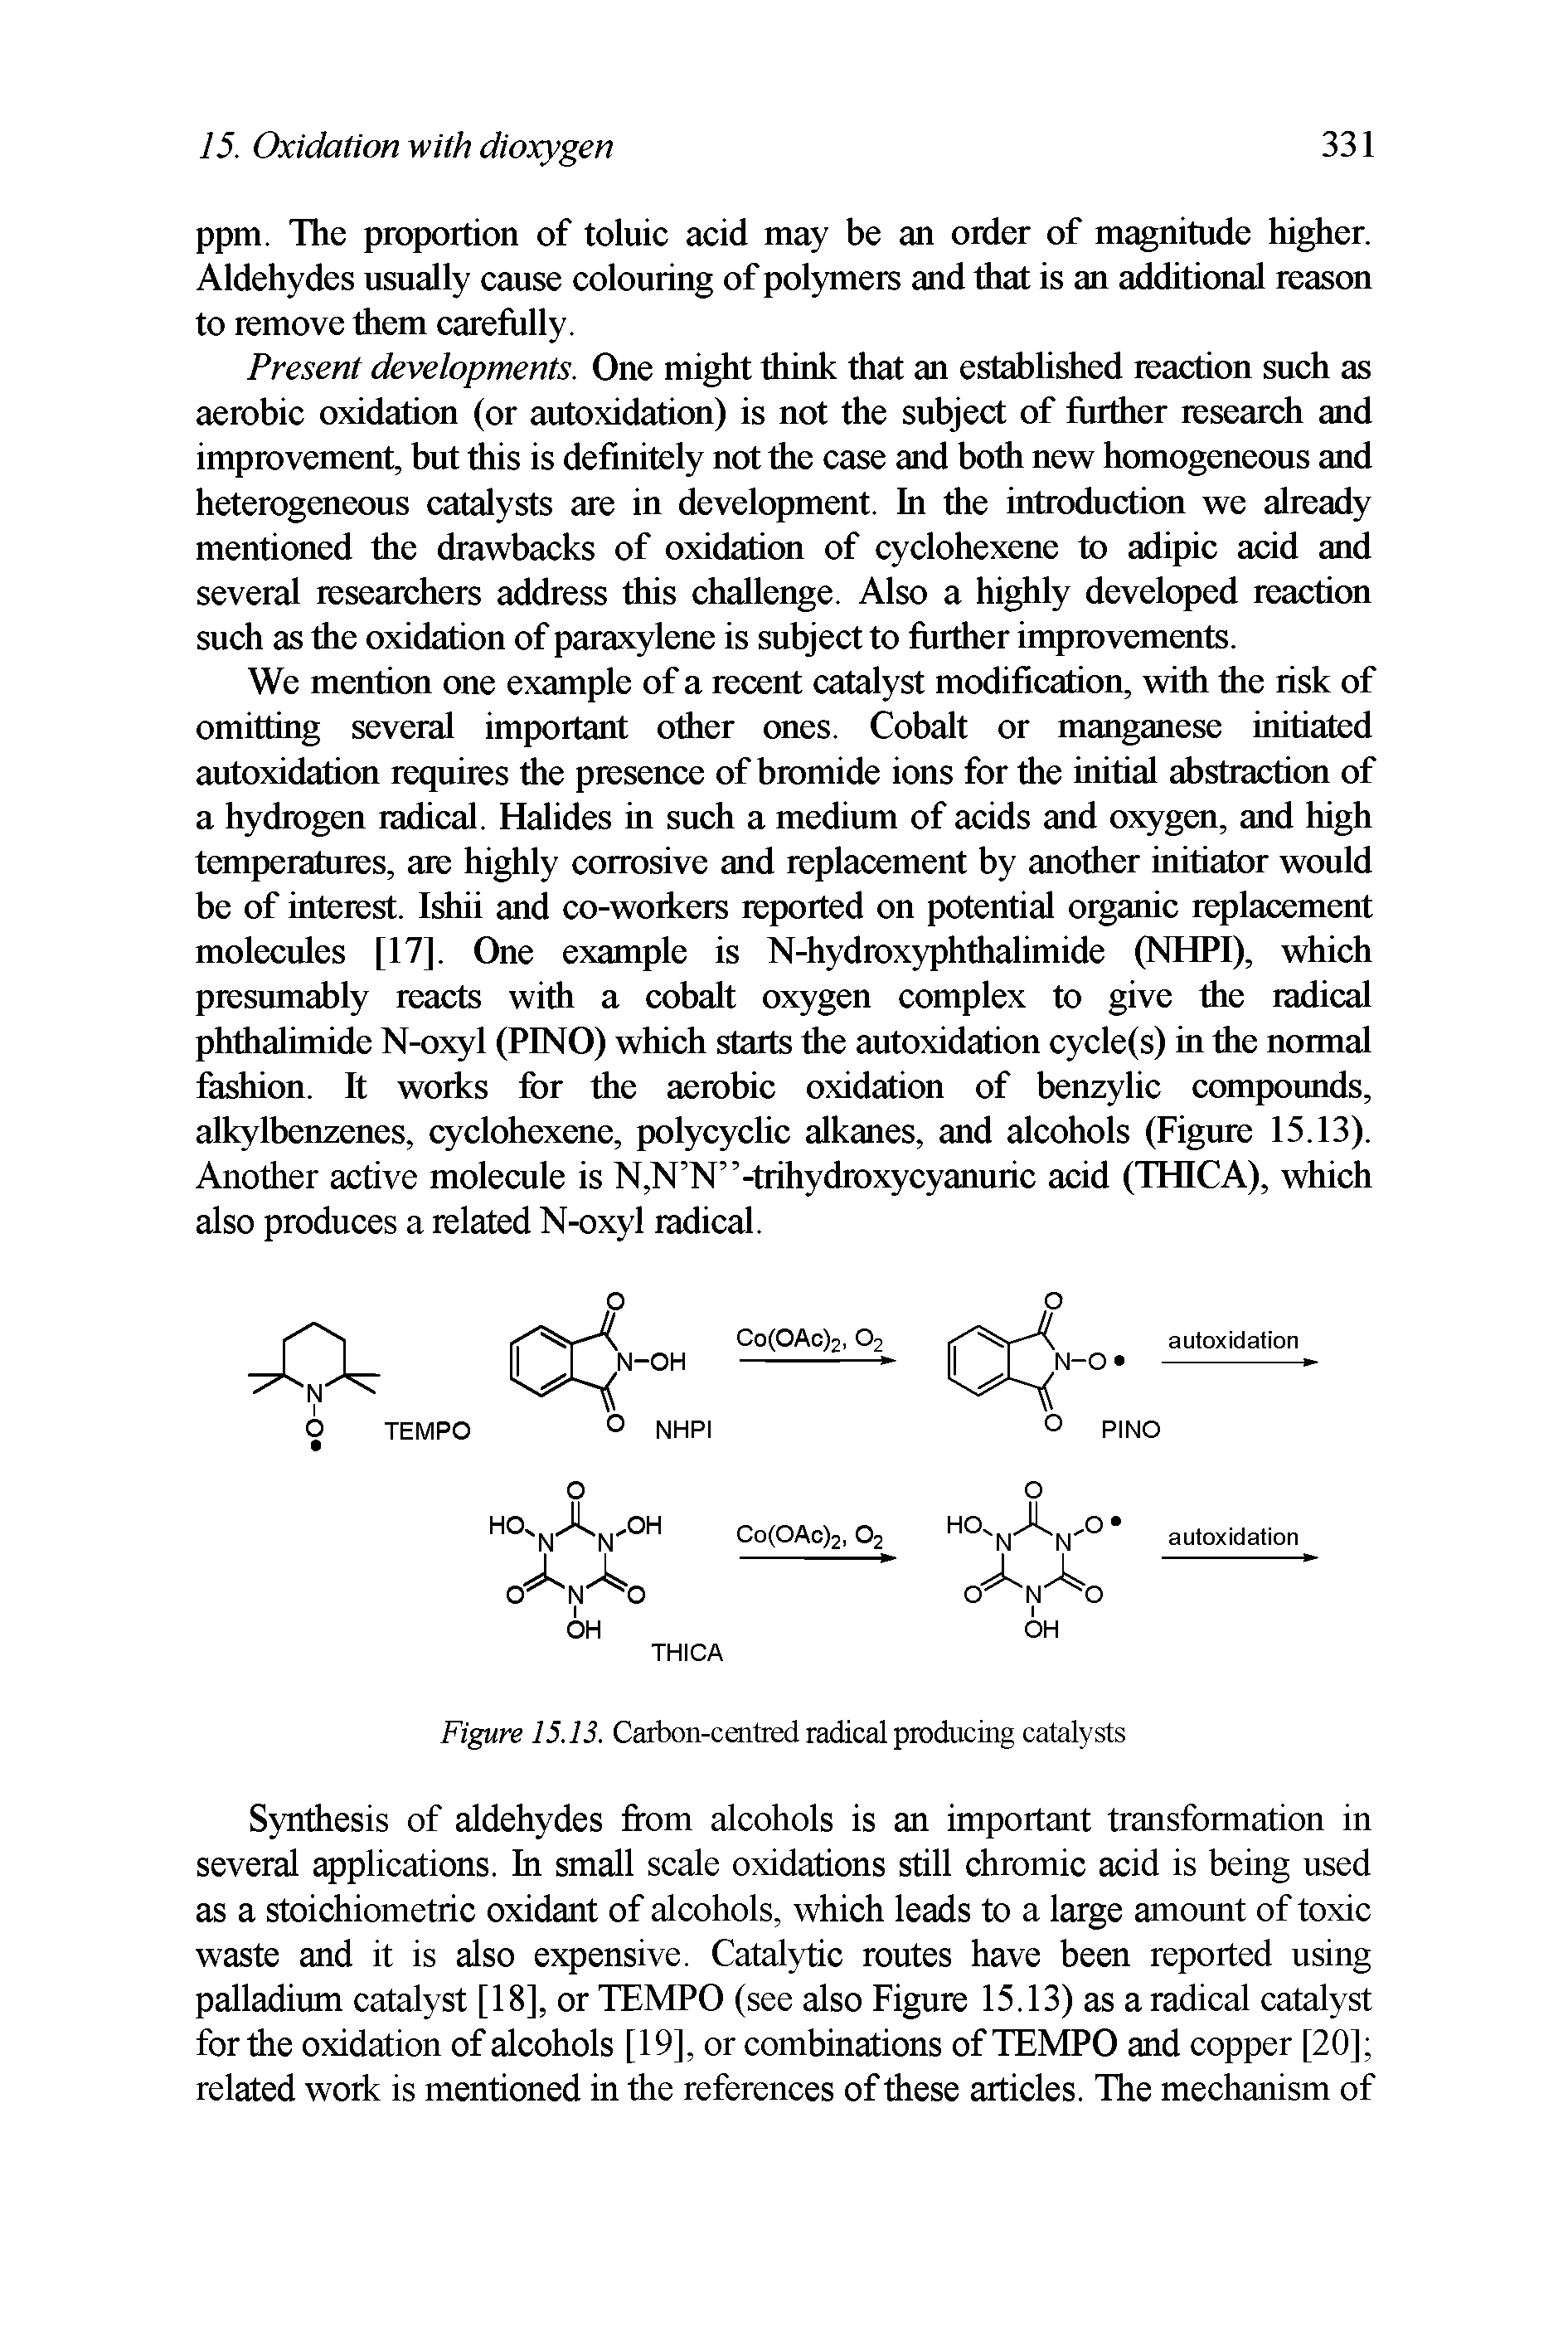 Figure 15.13. Carbon-centred radical producing catalysts...